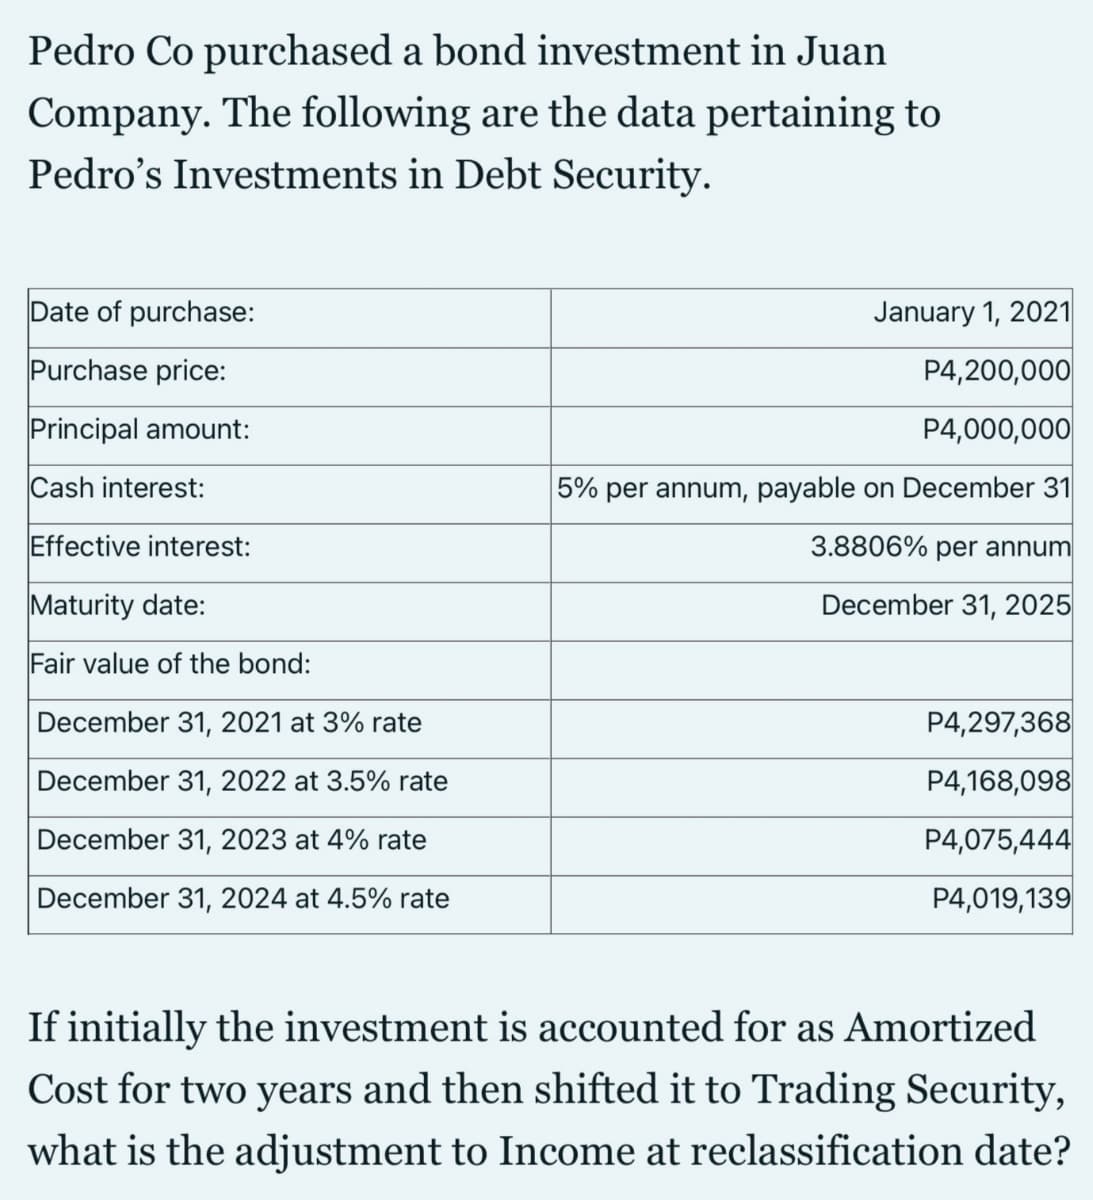 Pedro Co purchased a bond investment in Juan
Company. The following are the data pertaining to
Pedro's Investments in Debt Security.
Date of purchase:
January 1, 2021
Purchase price:
P4,200,000
Principal amount:
P4,000,000
Cash interest:
5% per annum, payable on December 31
Effective interest:
3.8806% per annum
Maturity date:
December 31, 2025
Fair value of the bond:
December 31, 2021 at 3% rate
P4,297,368
December 31, 2022 at 3.5% rate
P4,168,098
December 31, 2023 at 4% rate
P4,075,444
December 31, 2024 at 4.5% rate
P4,019,139
If initially the investment is accounted for as Amortized
Cost for two years and then shifted it to Trading Security,
what is the adjustment to Income at reclassification date?
